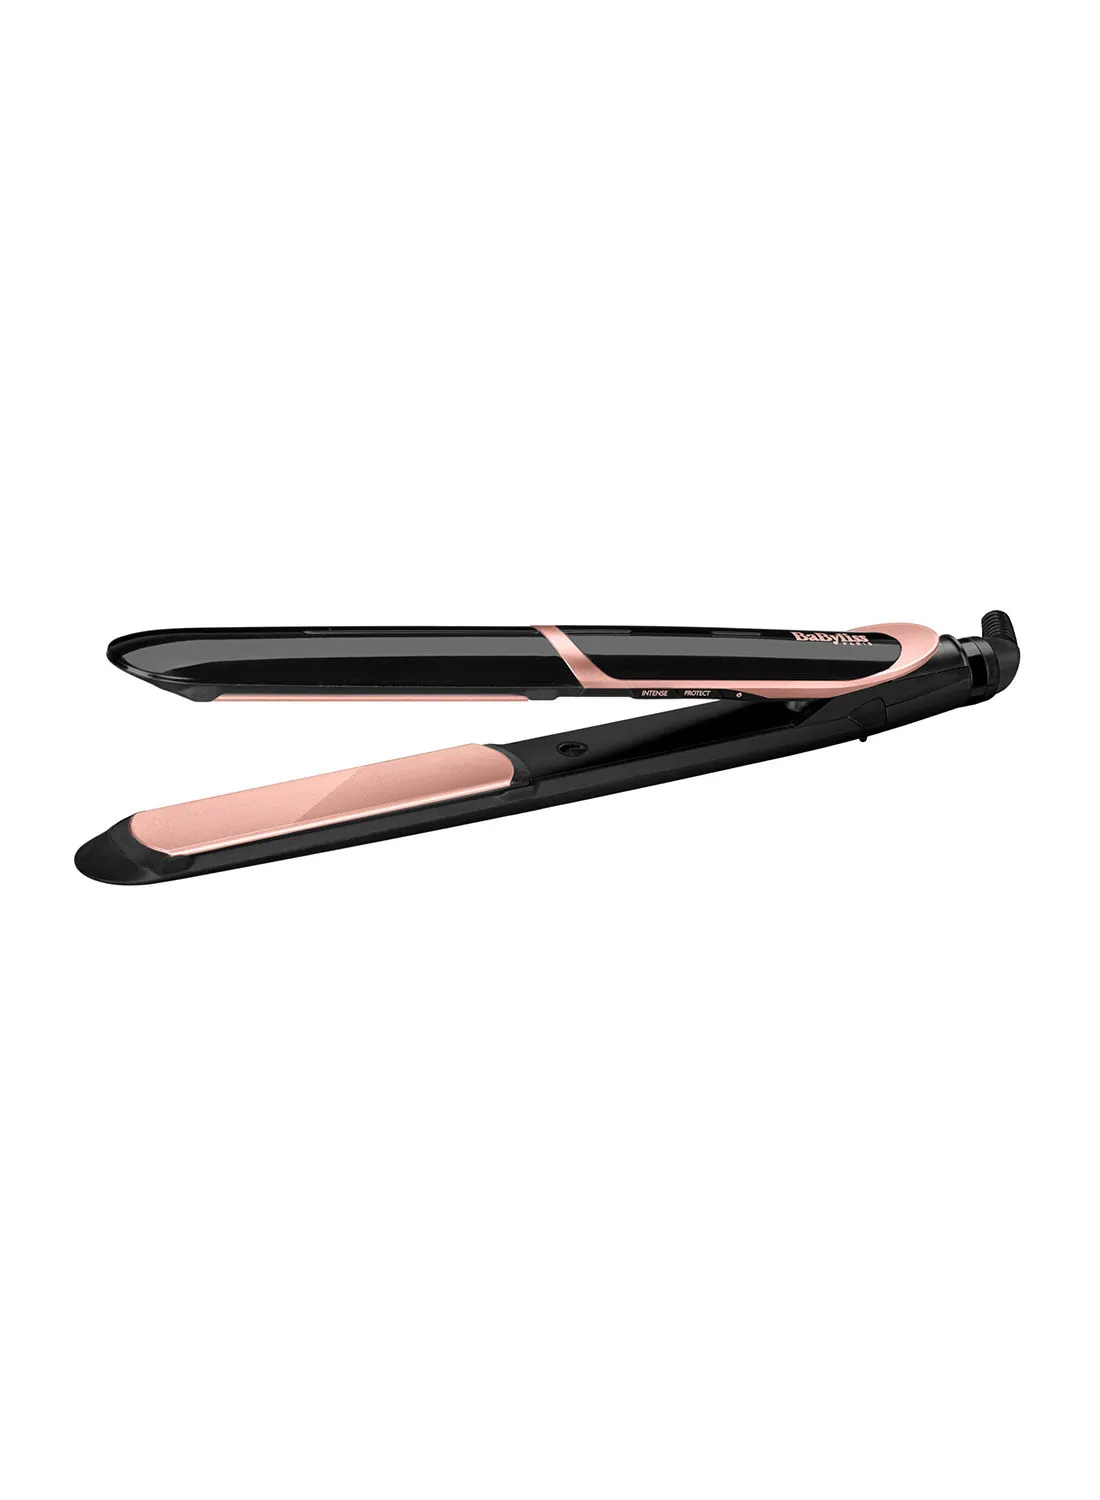 babyliss Shimmer Hair Straightener Fast Heat-up With Tourmaline-ceramic Coated Plates 6 Digital Heat Settings 140°C - 235°C Ionic Frizz Control And Auto Shut Off Black